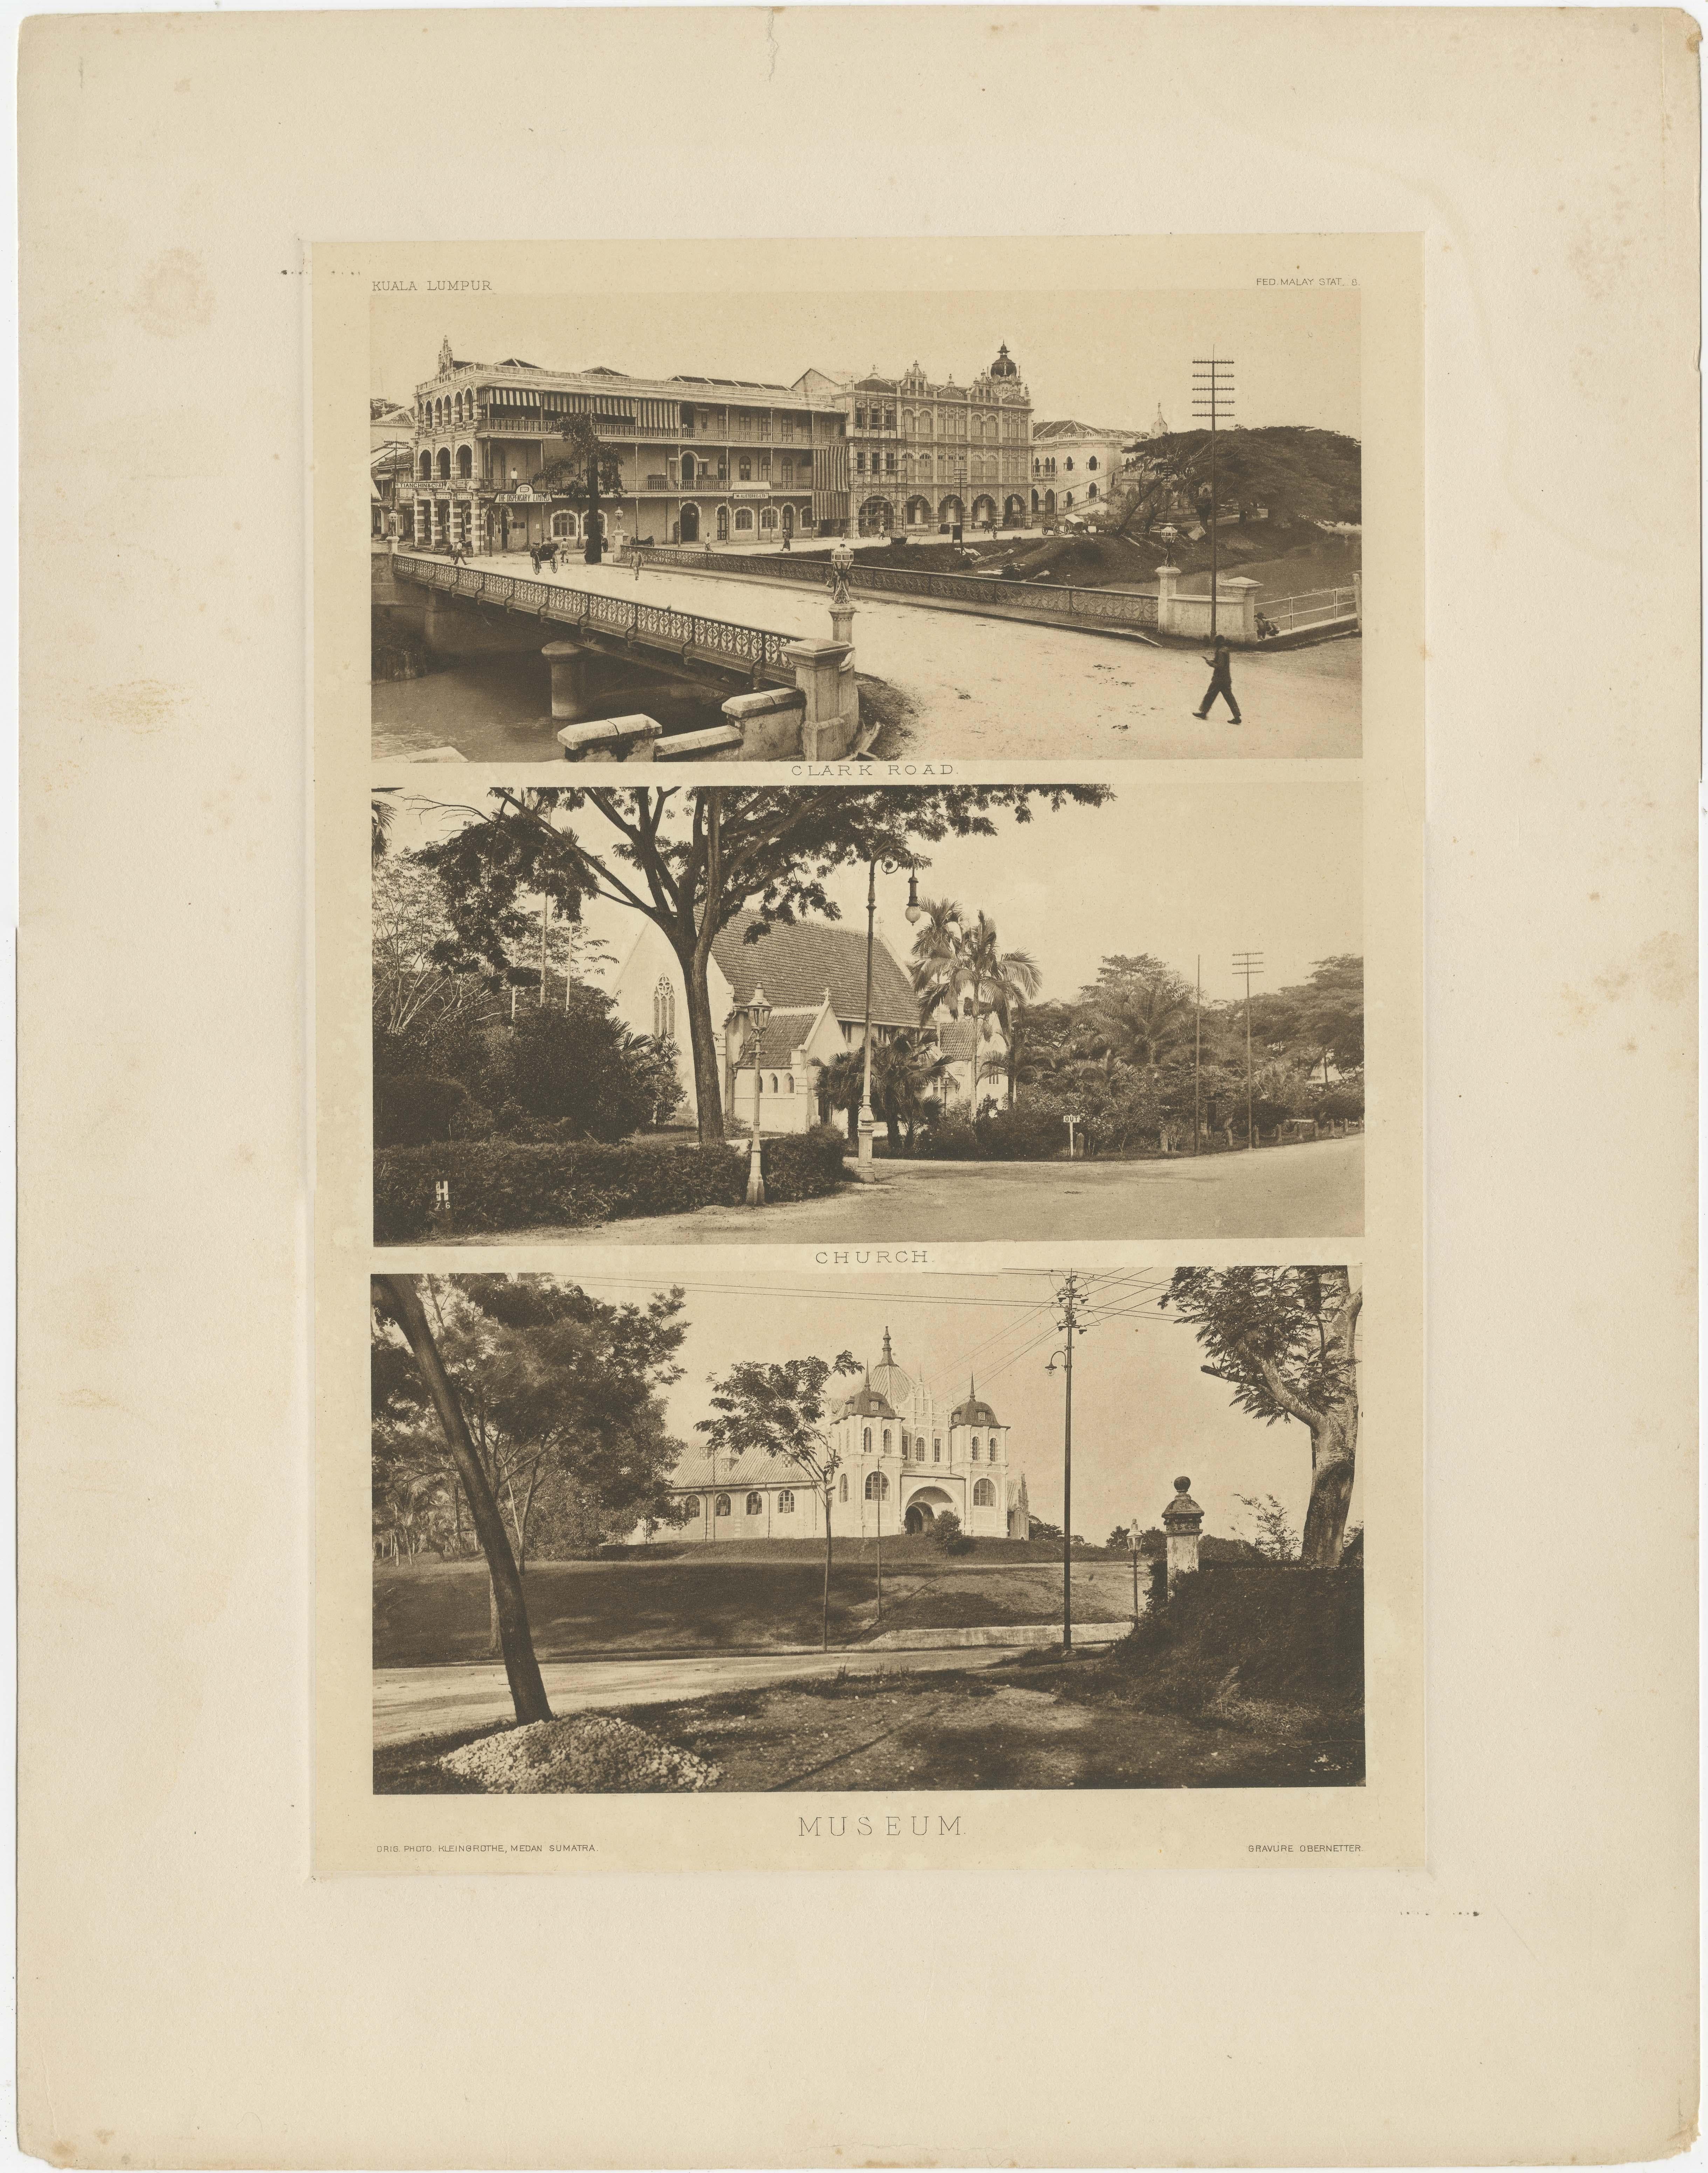 Three views of early Kuala Lumpur, Malaysia in 1907. 

1) Clark Road
2) Church
3 Museum


This heliogravures are on one leaf from the extremely rare boxed Malay Peninsula portfolio originally containing 72 leaves in total and made after